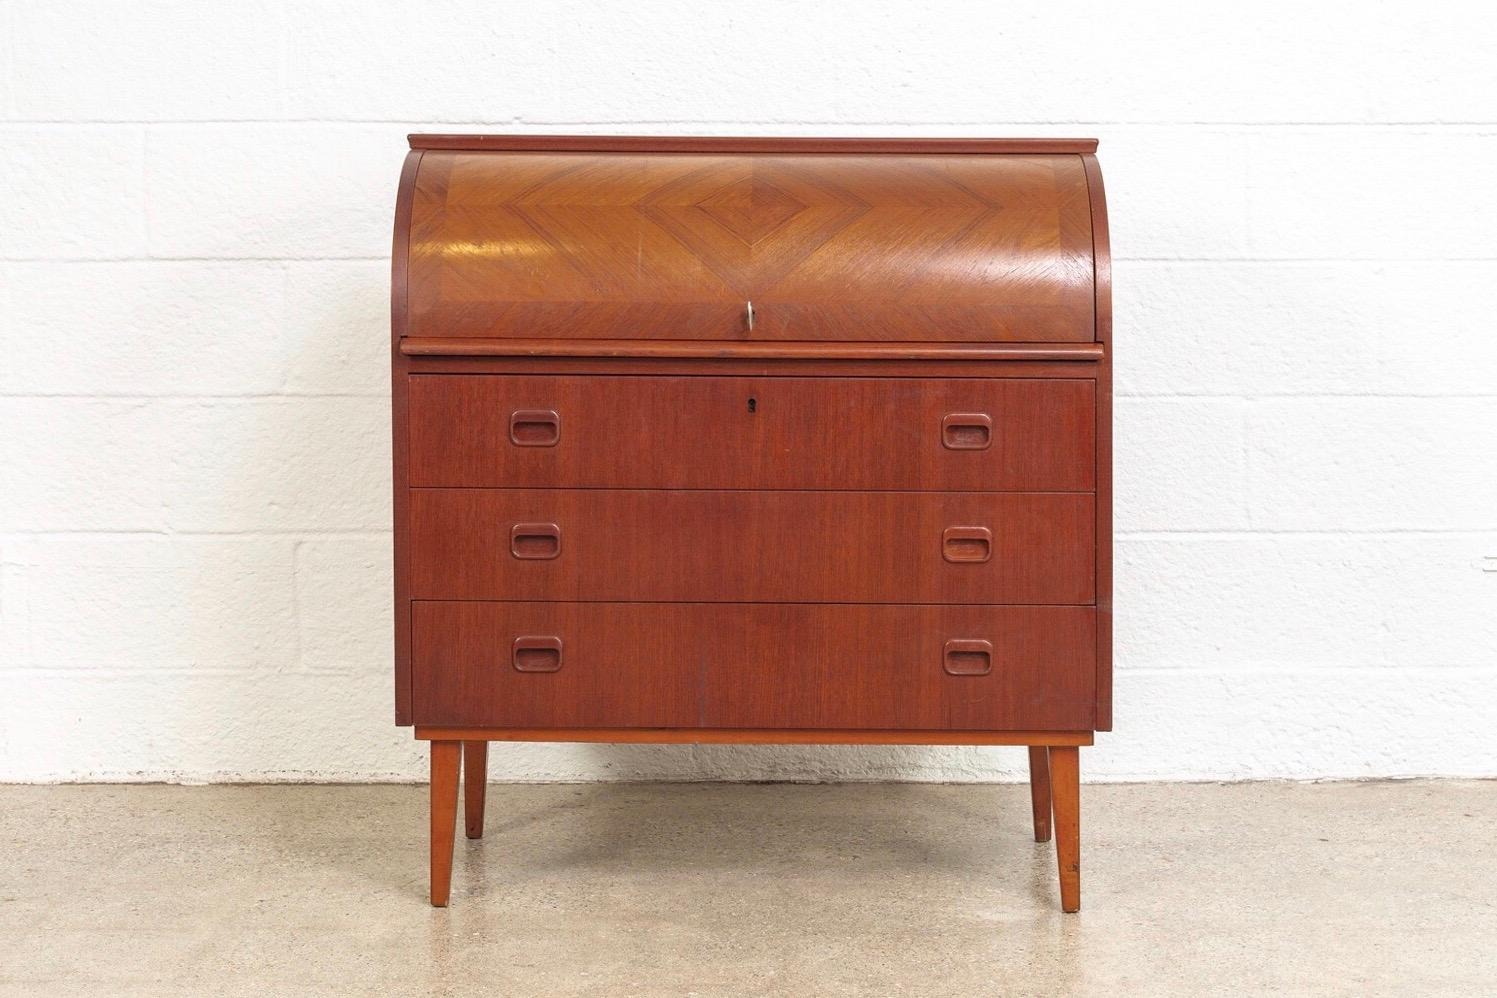 This iconic midcentury Swedish modern Egon Ostergaard teak cylinder rolltop secretary desk cabinet is circa 1970. The Classic Scandinavian Modern design has clean Minimalist lines and features a beautiful inlaid diamond-patterned rolltop surface.